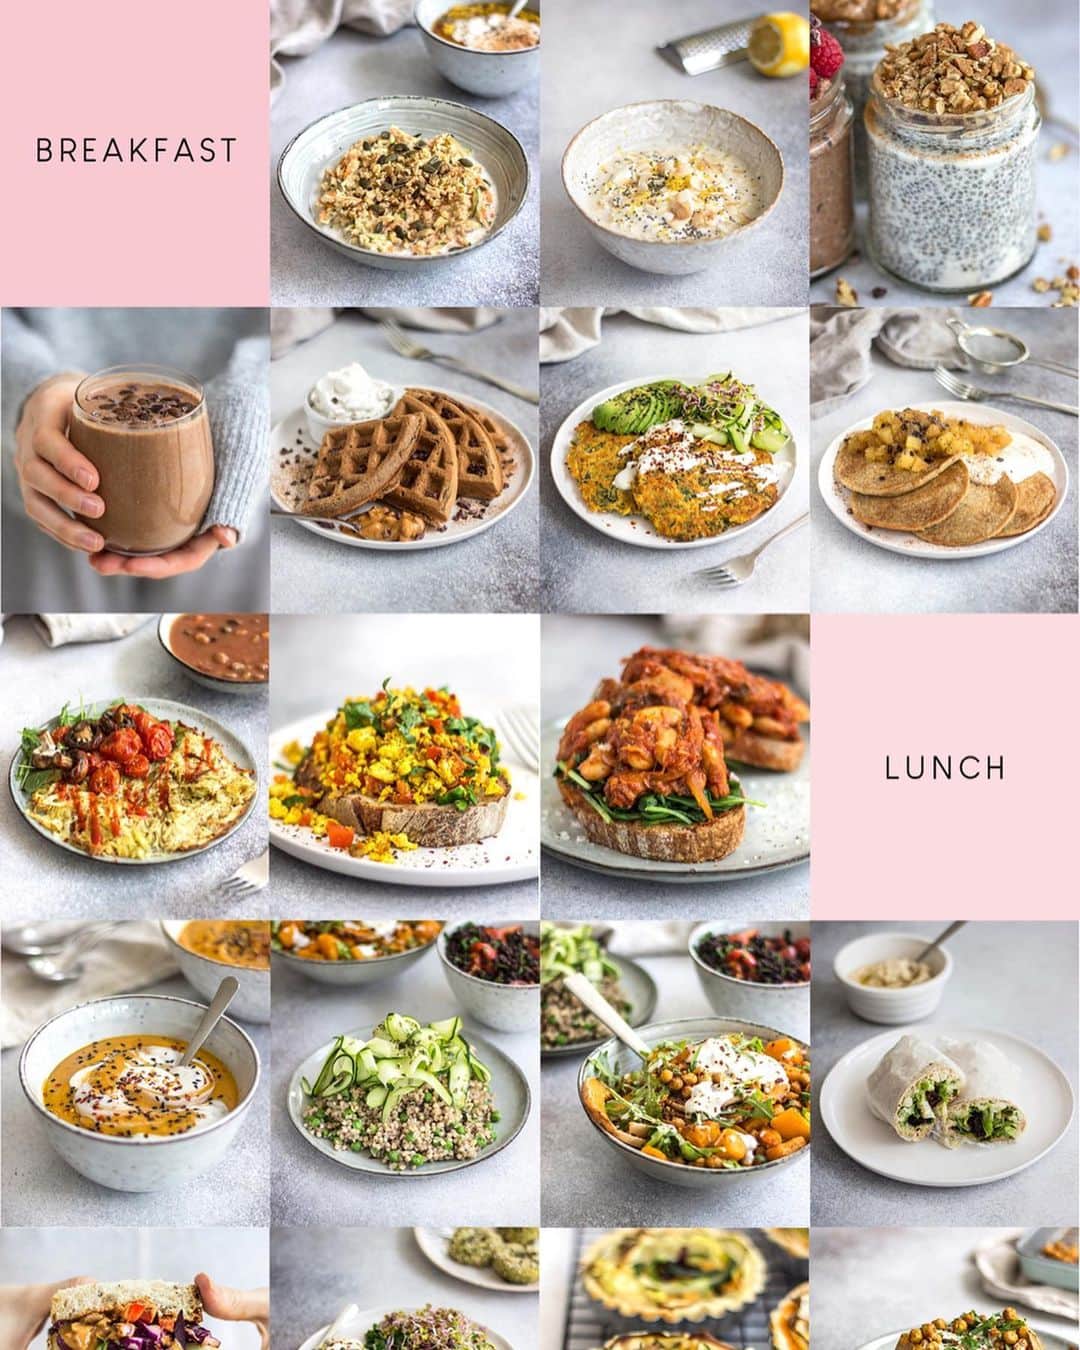 Zanna Van Dijkさんのインスタグラム写真 - (Zanna Van DijkInstagram)「Eat More Plants is now LIVE! 🥳🌱 My brand new ebook packed with simple recipes to make plant based eating easy 🎉 We all know that eating a more plant focused diet is an amazing way to support the planet 🌎 Simply halving your meat consumption reduces your diets nitrogen emissions by 40%, greenhouse gas emissions by 40% and land use by 23% 🤓 However it can can be overwhelming to take the first step, so this ebook contains everything you need to get started! 👩🏼‍🍳 Including 40 seriously simple recipes, my store cupboard essentials and my personal tips and tricks for adopting a plant-focused diet ✅ The recipes include speedy breakfasts, on-the-go lunches, quick dinners, sweet treats and show stoppers 💃 It’s basically all my favourite no-fuss recipes which use easy to access ingredients and leave me feeling fuelled, nourished and satisfied. Each recipe comes with a photo, the method, a nutritional nugget and substitution guidance for if your cupboards aren’t fully stocked 👍🏼 They include everything from wholesome salad bowls through to healthy cookie dough and vegan sausage rolls! 🍪 And the best bit? The ebook is only £12.99! 🙌🏼 So click the link on my bio & grab a copy! If you make a recipe please tag #plantsfortheplanet so I can see your creations! 😋 I honestly poured my heart and soul into this ebook so I really hope you guys love it as much as I do! ❤️ #eatmoreplants #plantsfortheplanet #plantbased #plantbaseddiet #veganeats #plantbasedrecipes #veganrecipes #sustainablediet #eatfortheplanet」7月8日 2時00分 - zannavandijk